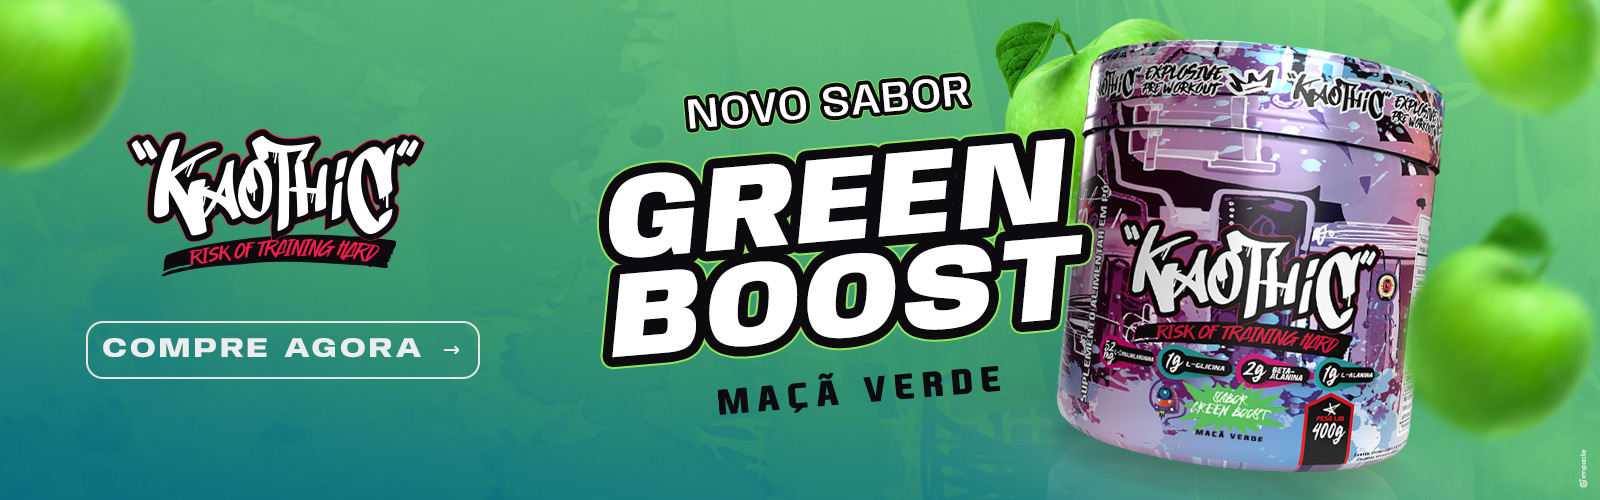 KAOTHIC GREEN BOOST